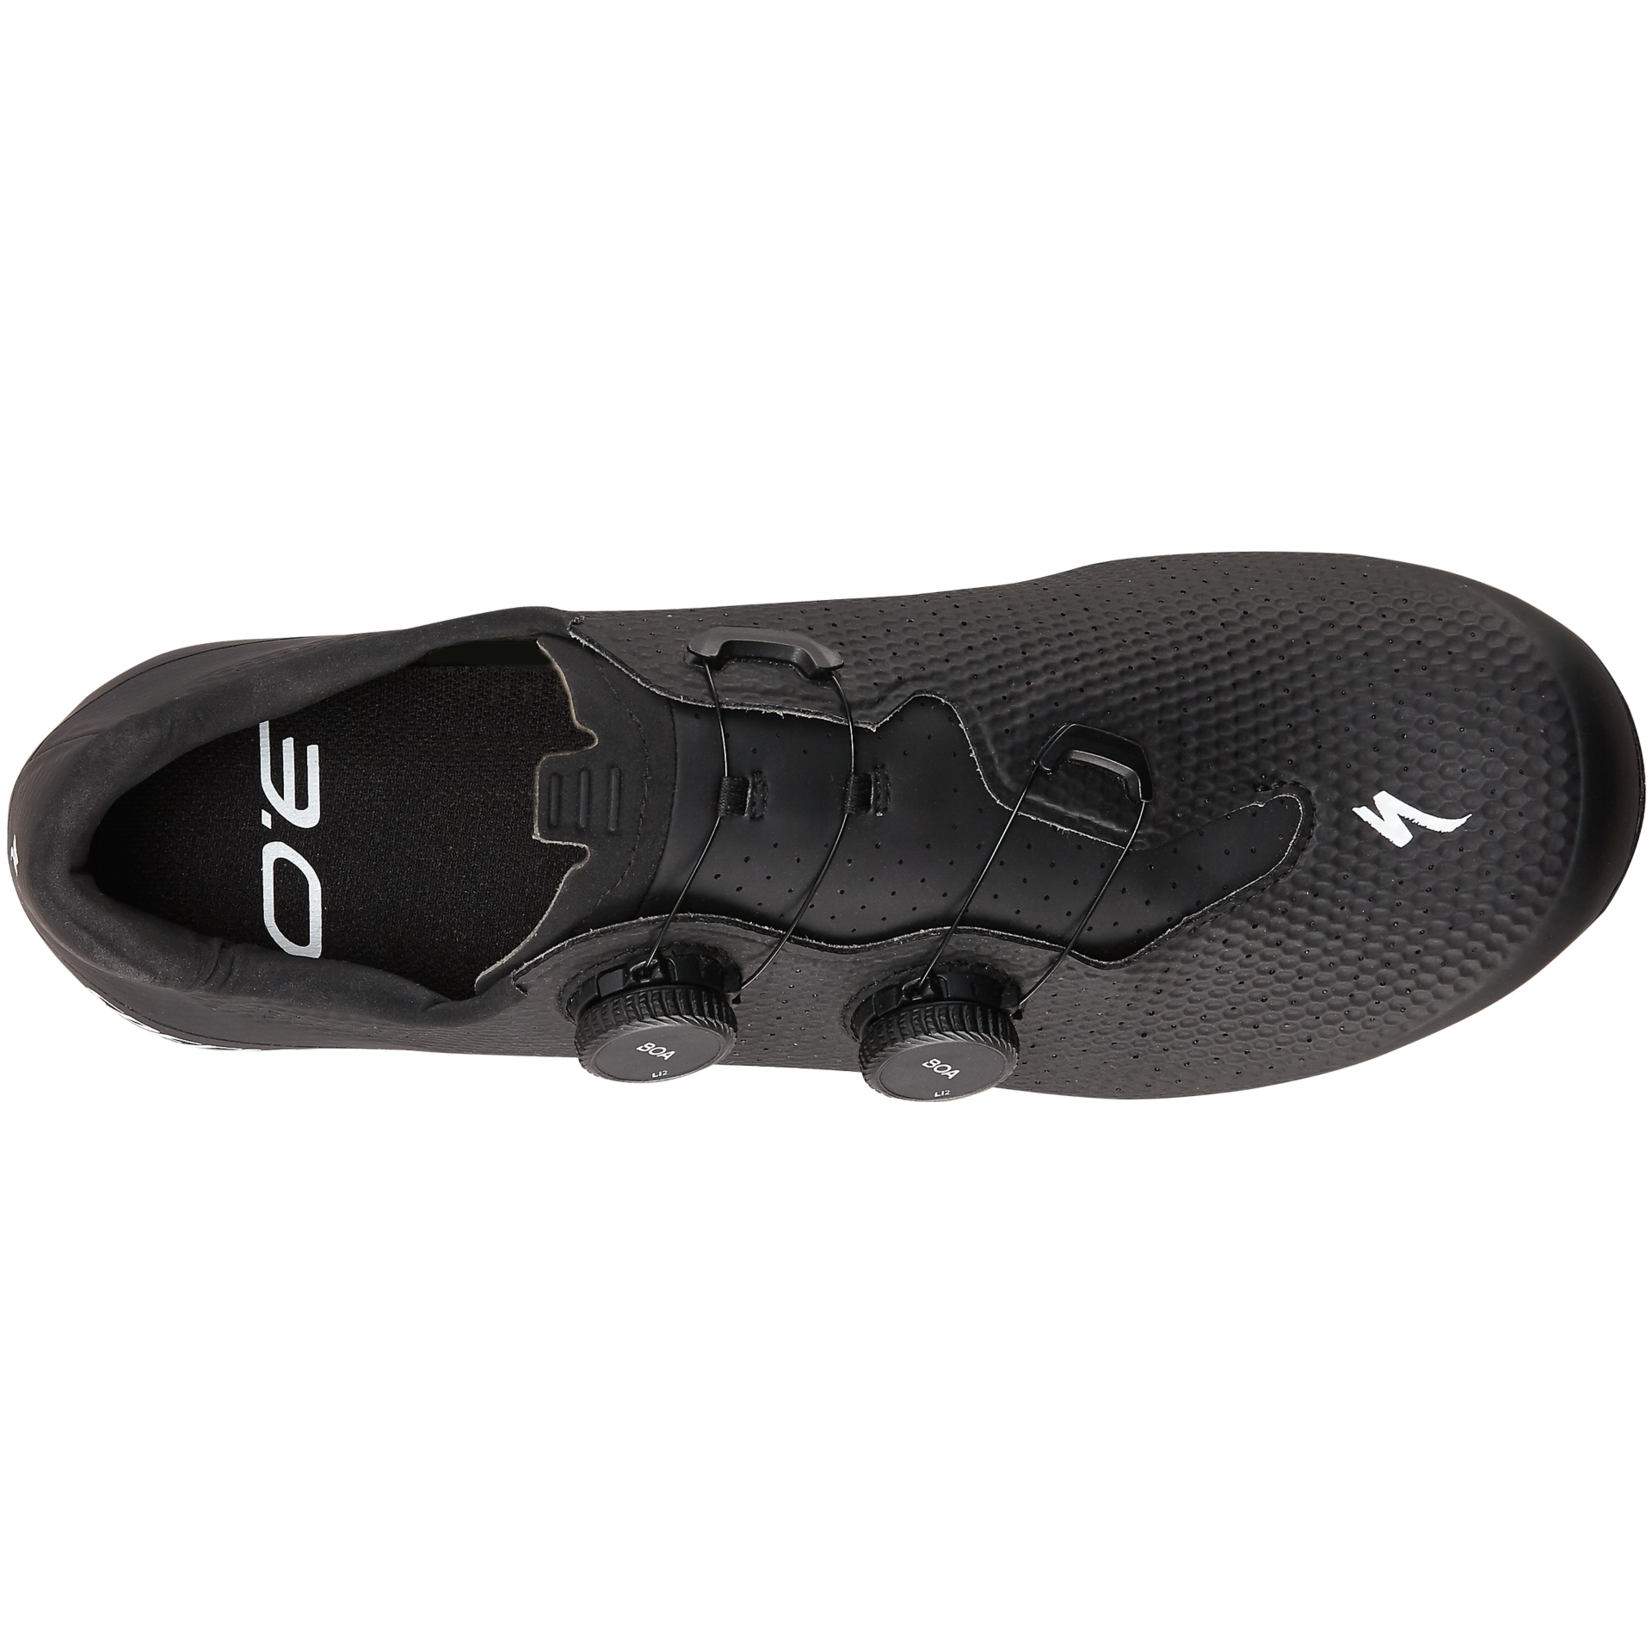 Specialized Chaussures de route Torch 3.0